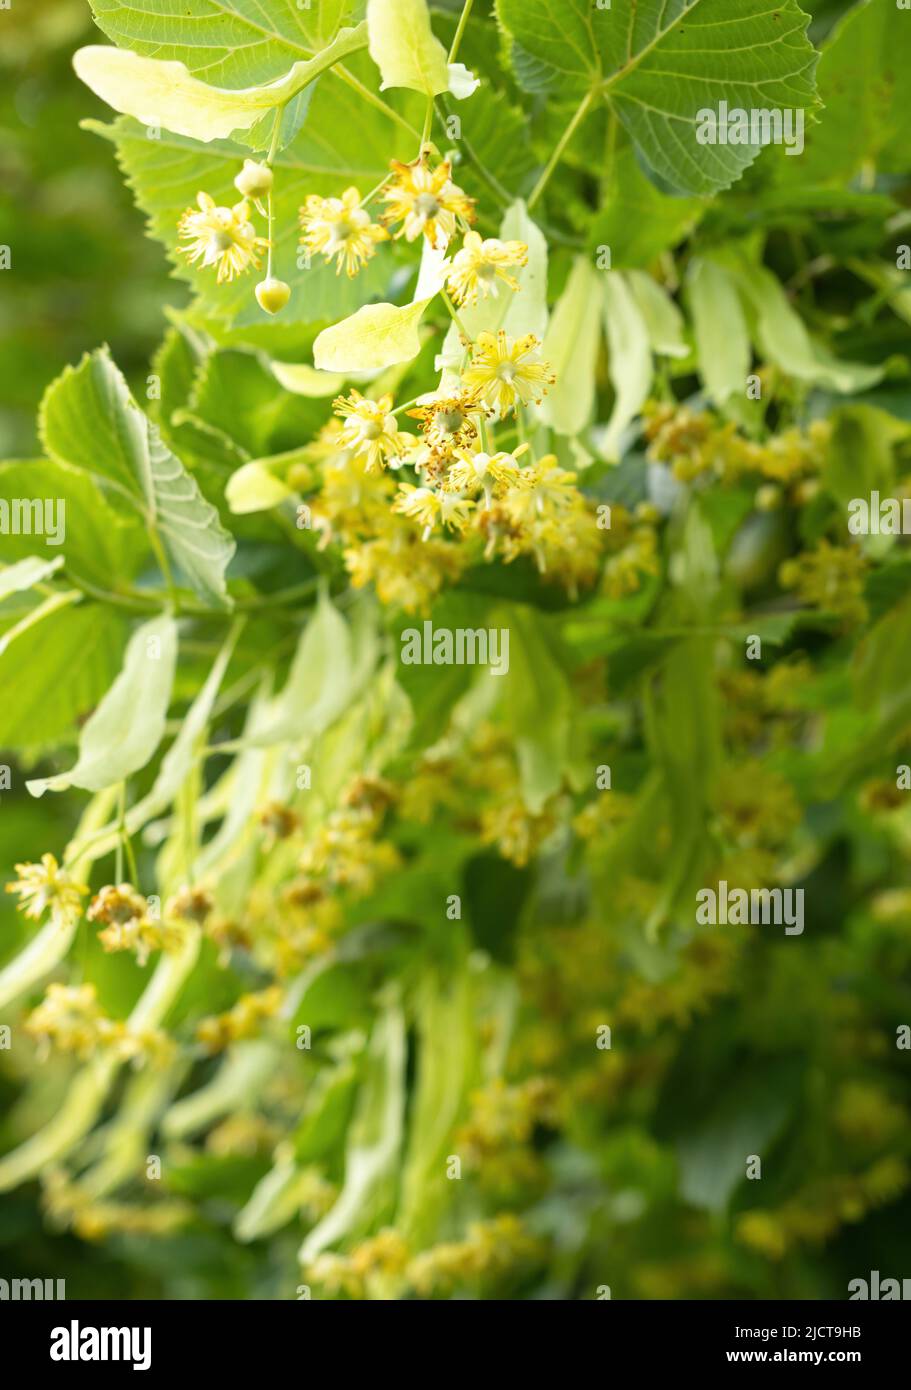 Blooming flowers of small leaved Linden tree (Tilia Cordata). Branch covered with yellow blossom used for herbal healing tea preparation. Natural back Stock Photo